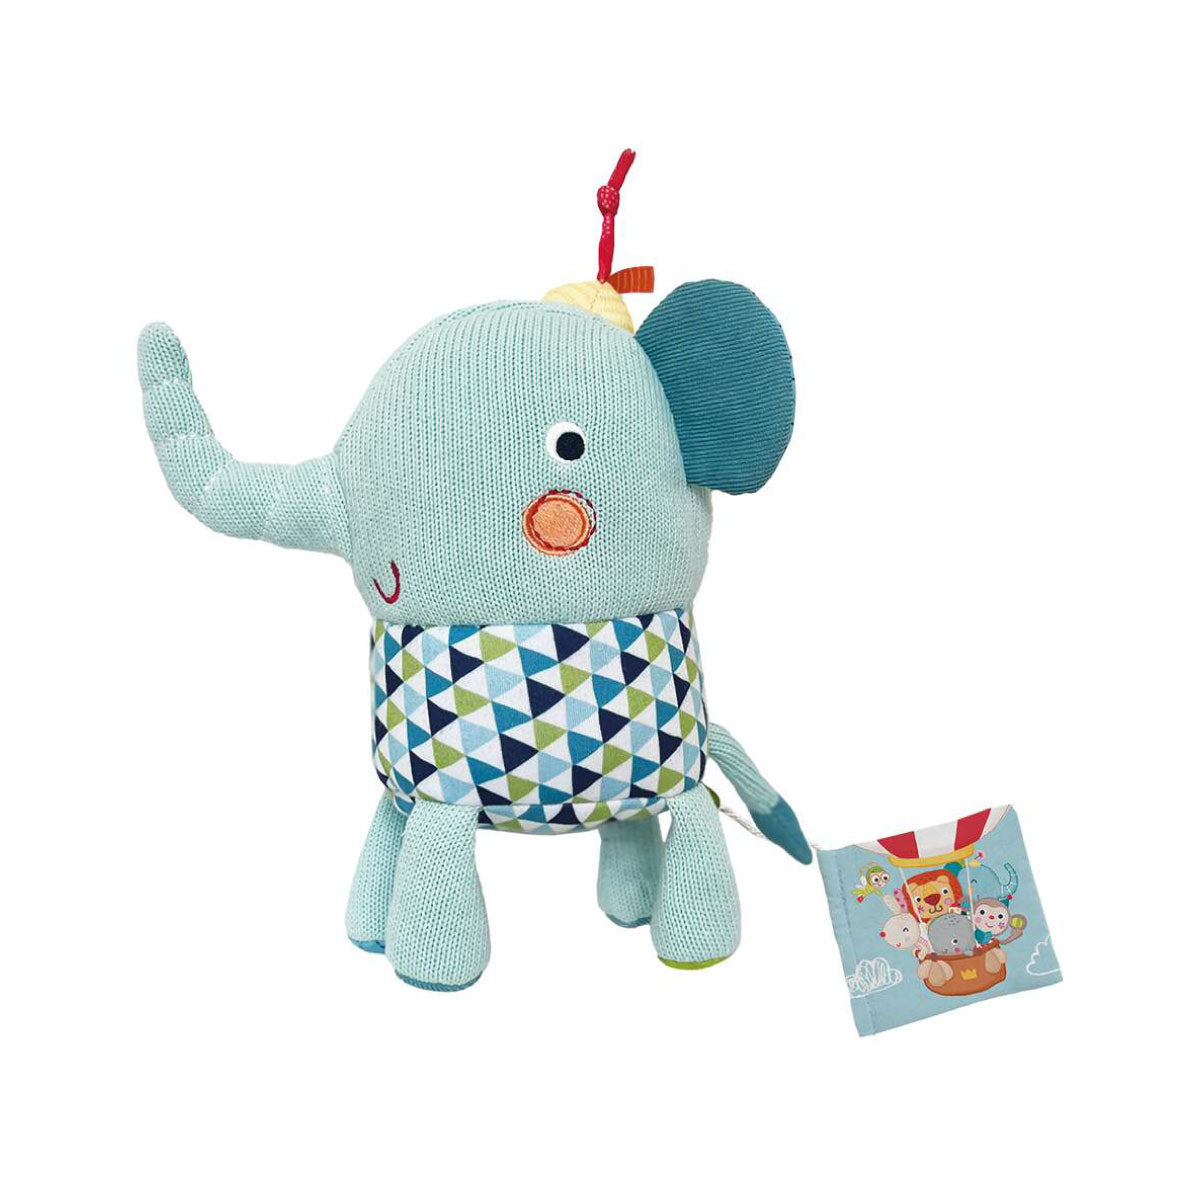 Bababoo & Friends Best Friend Lolo Elephant Bababoo Plush Toy